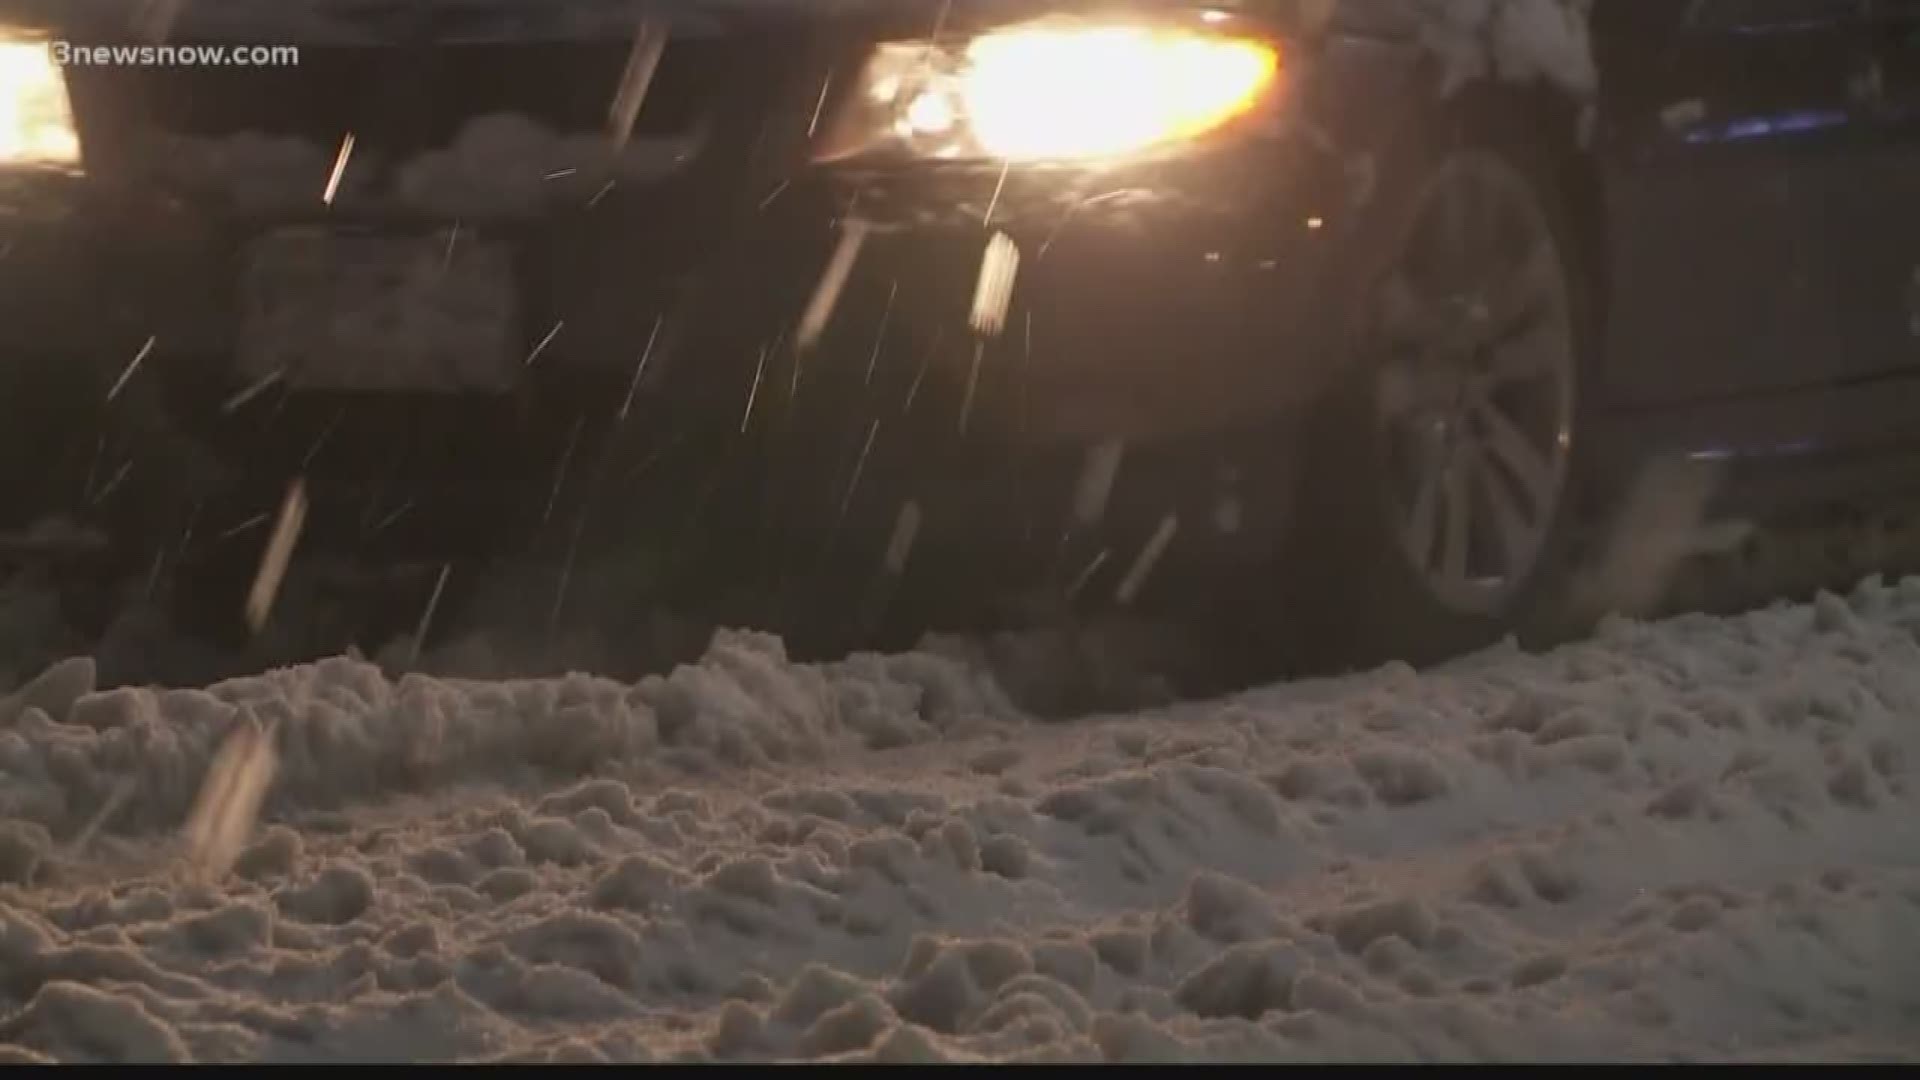 Drivers in Williamsburg staying careful on the roads